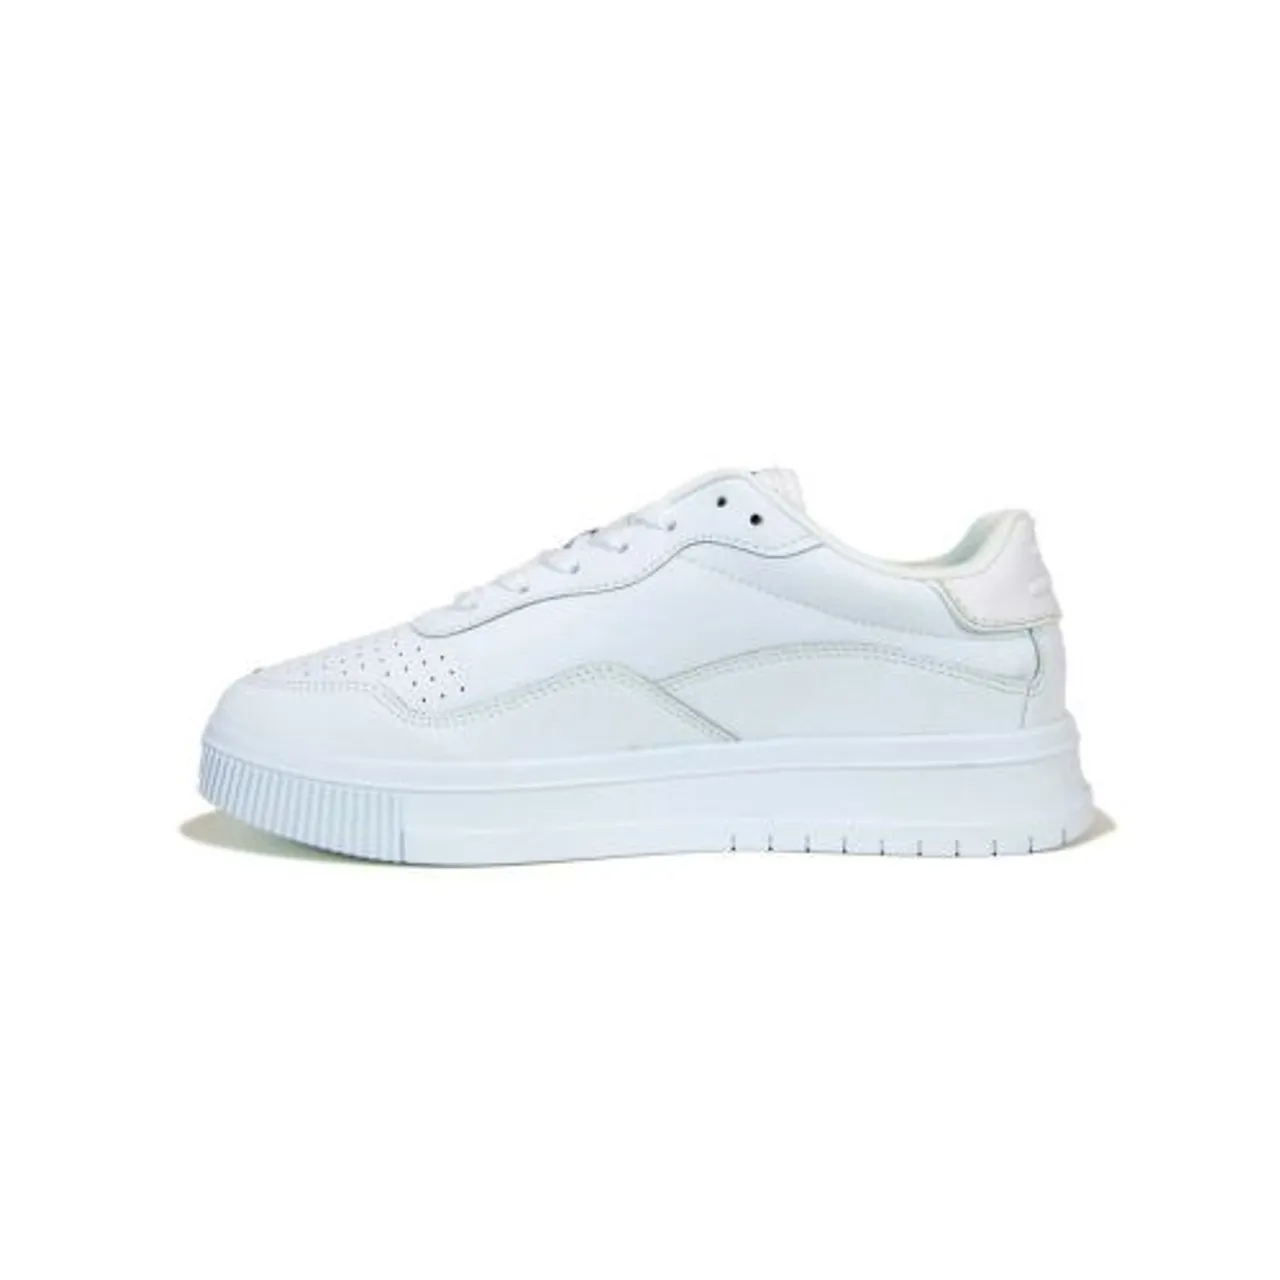 Tommy Hilfiger Mens White Supercup Leather Trainer